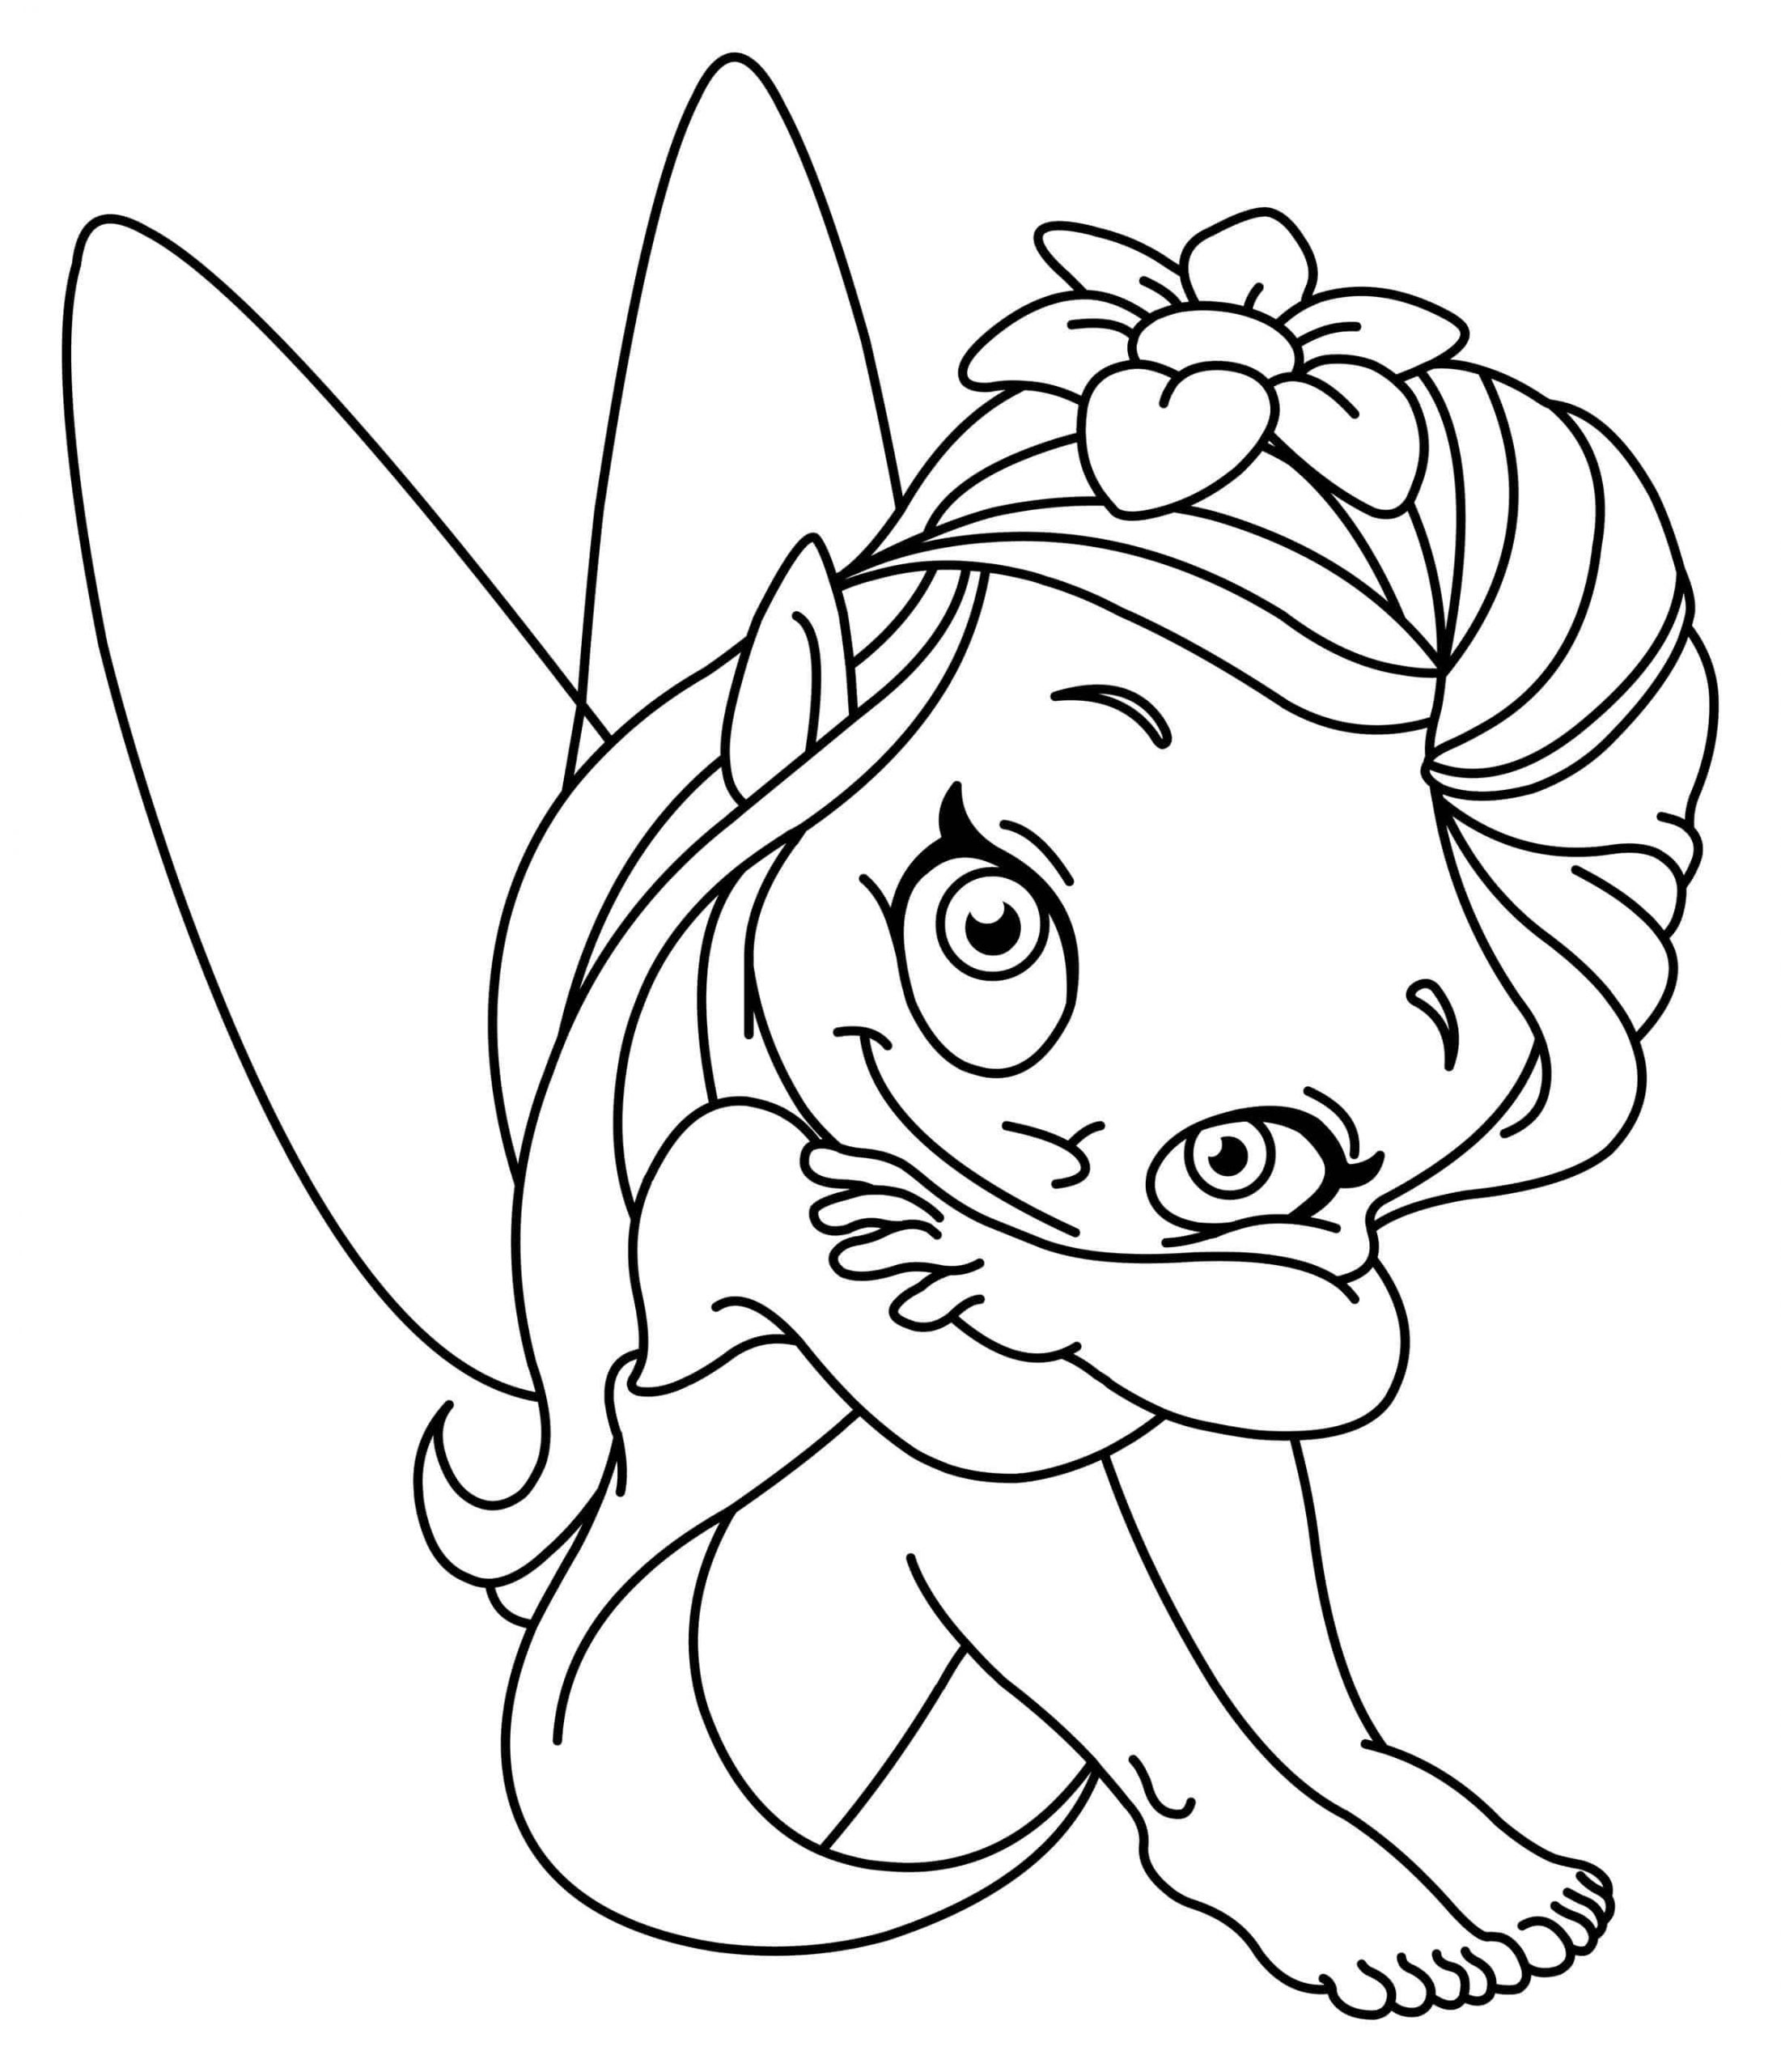 Coloring Sheets For Girls
 The Best Free Coloring Pages For Girls